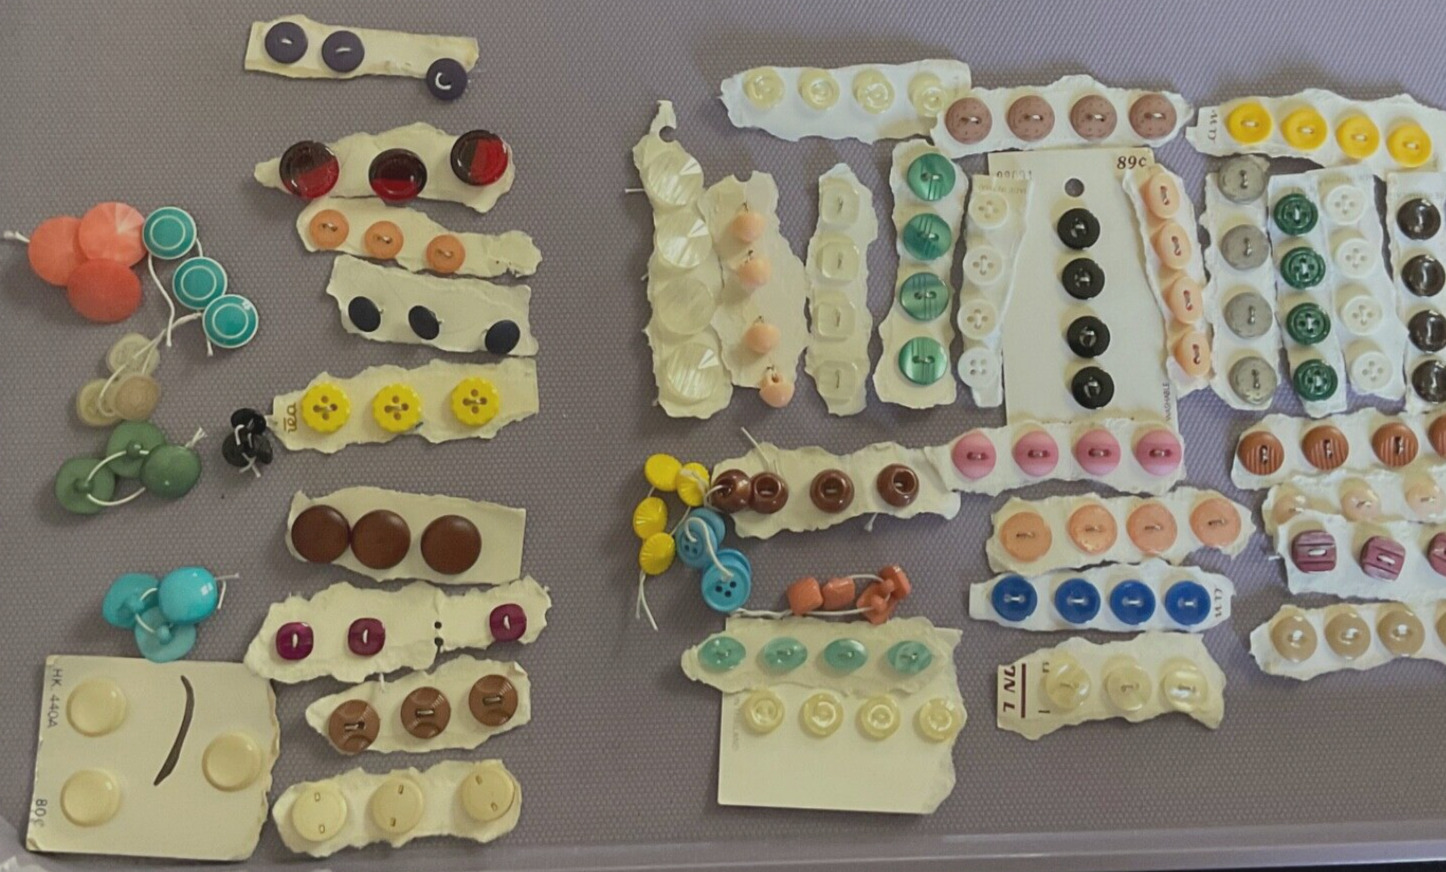 Big Lot of  150+ Vintage Sewing Buttons - Sets of 3 & 4